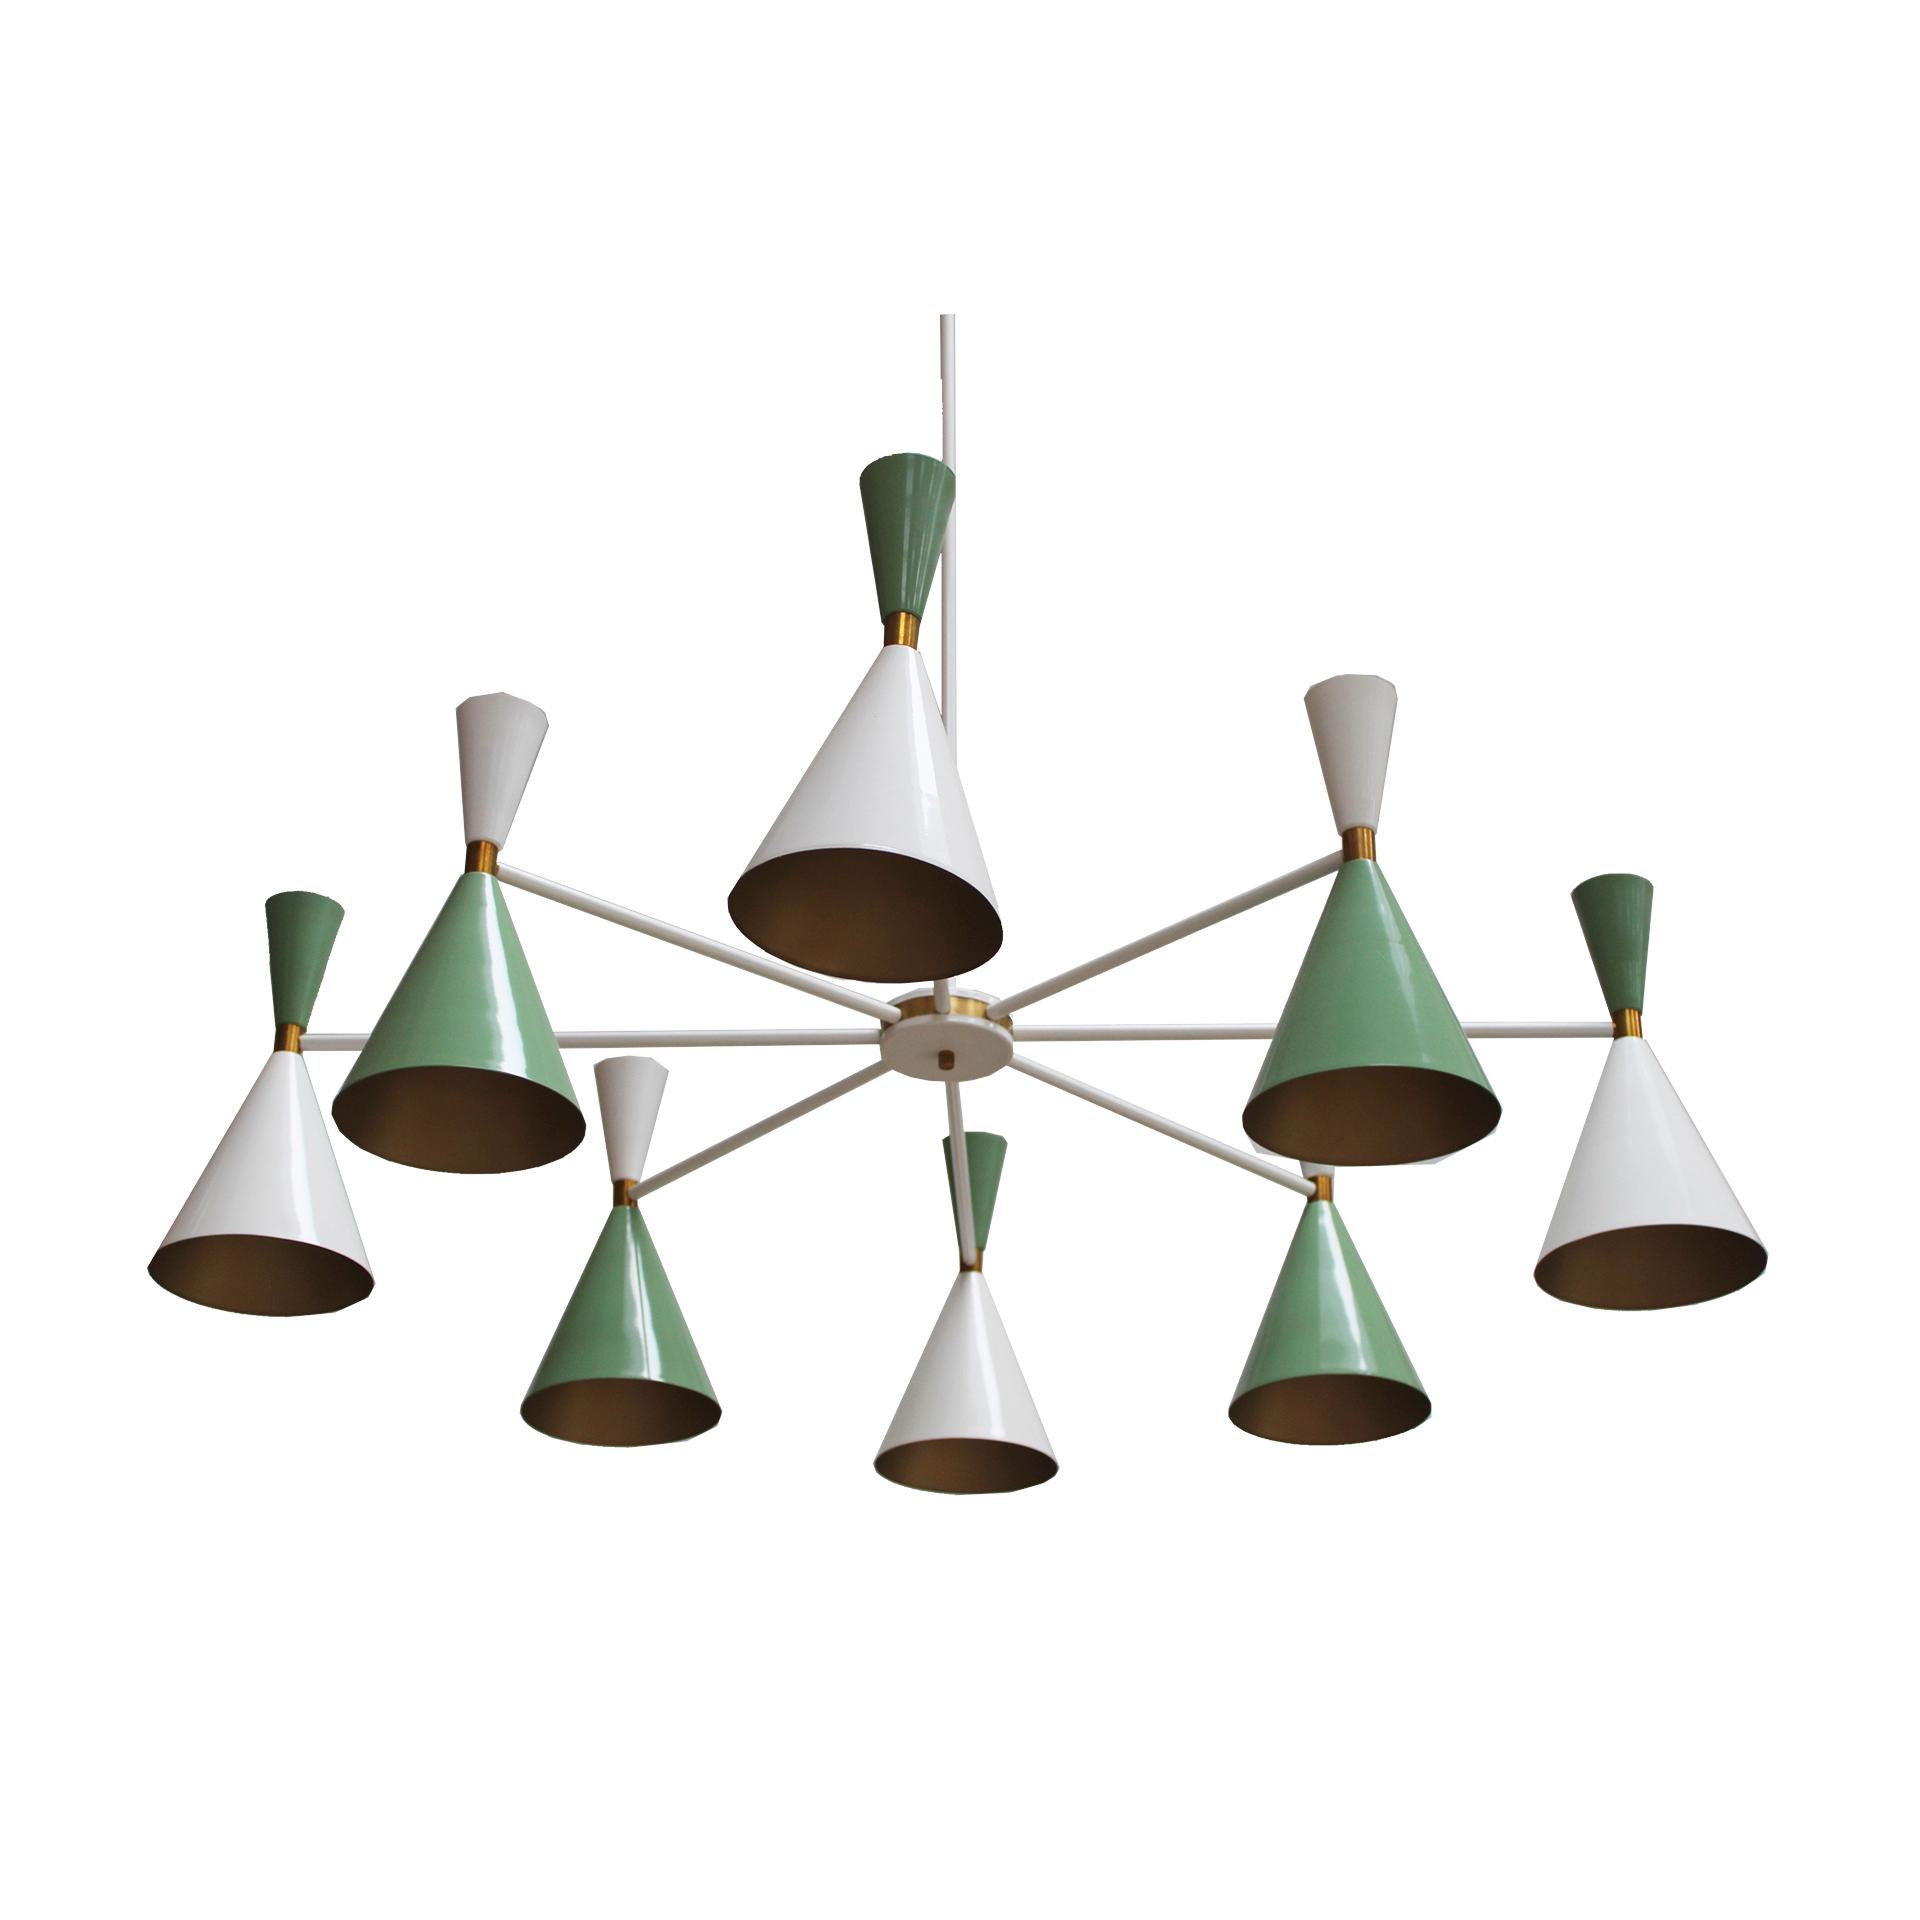 Pendant lamp, Stilnovo style. Composed of a radial structure with eight white lacquered arms and sixteen points of light with colored cups. Spain,

Dimensions: 150 x 150 x 160 (h) cm

*Bulbs not included

Every item LA Studio offers is checked by